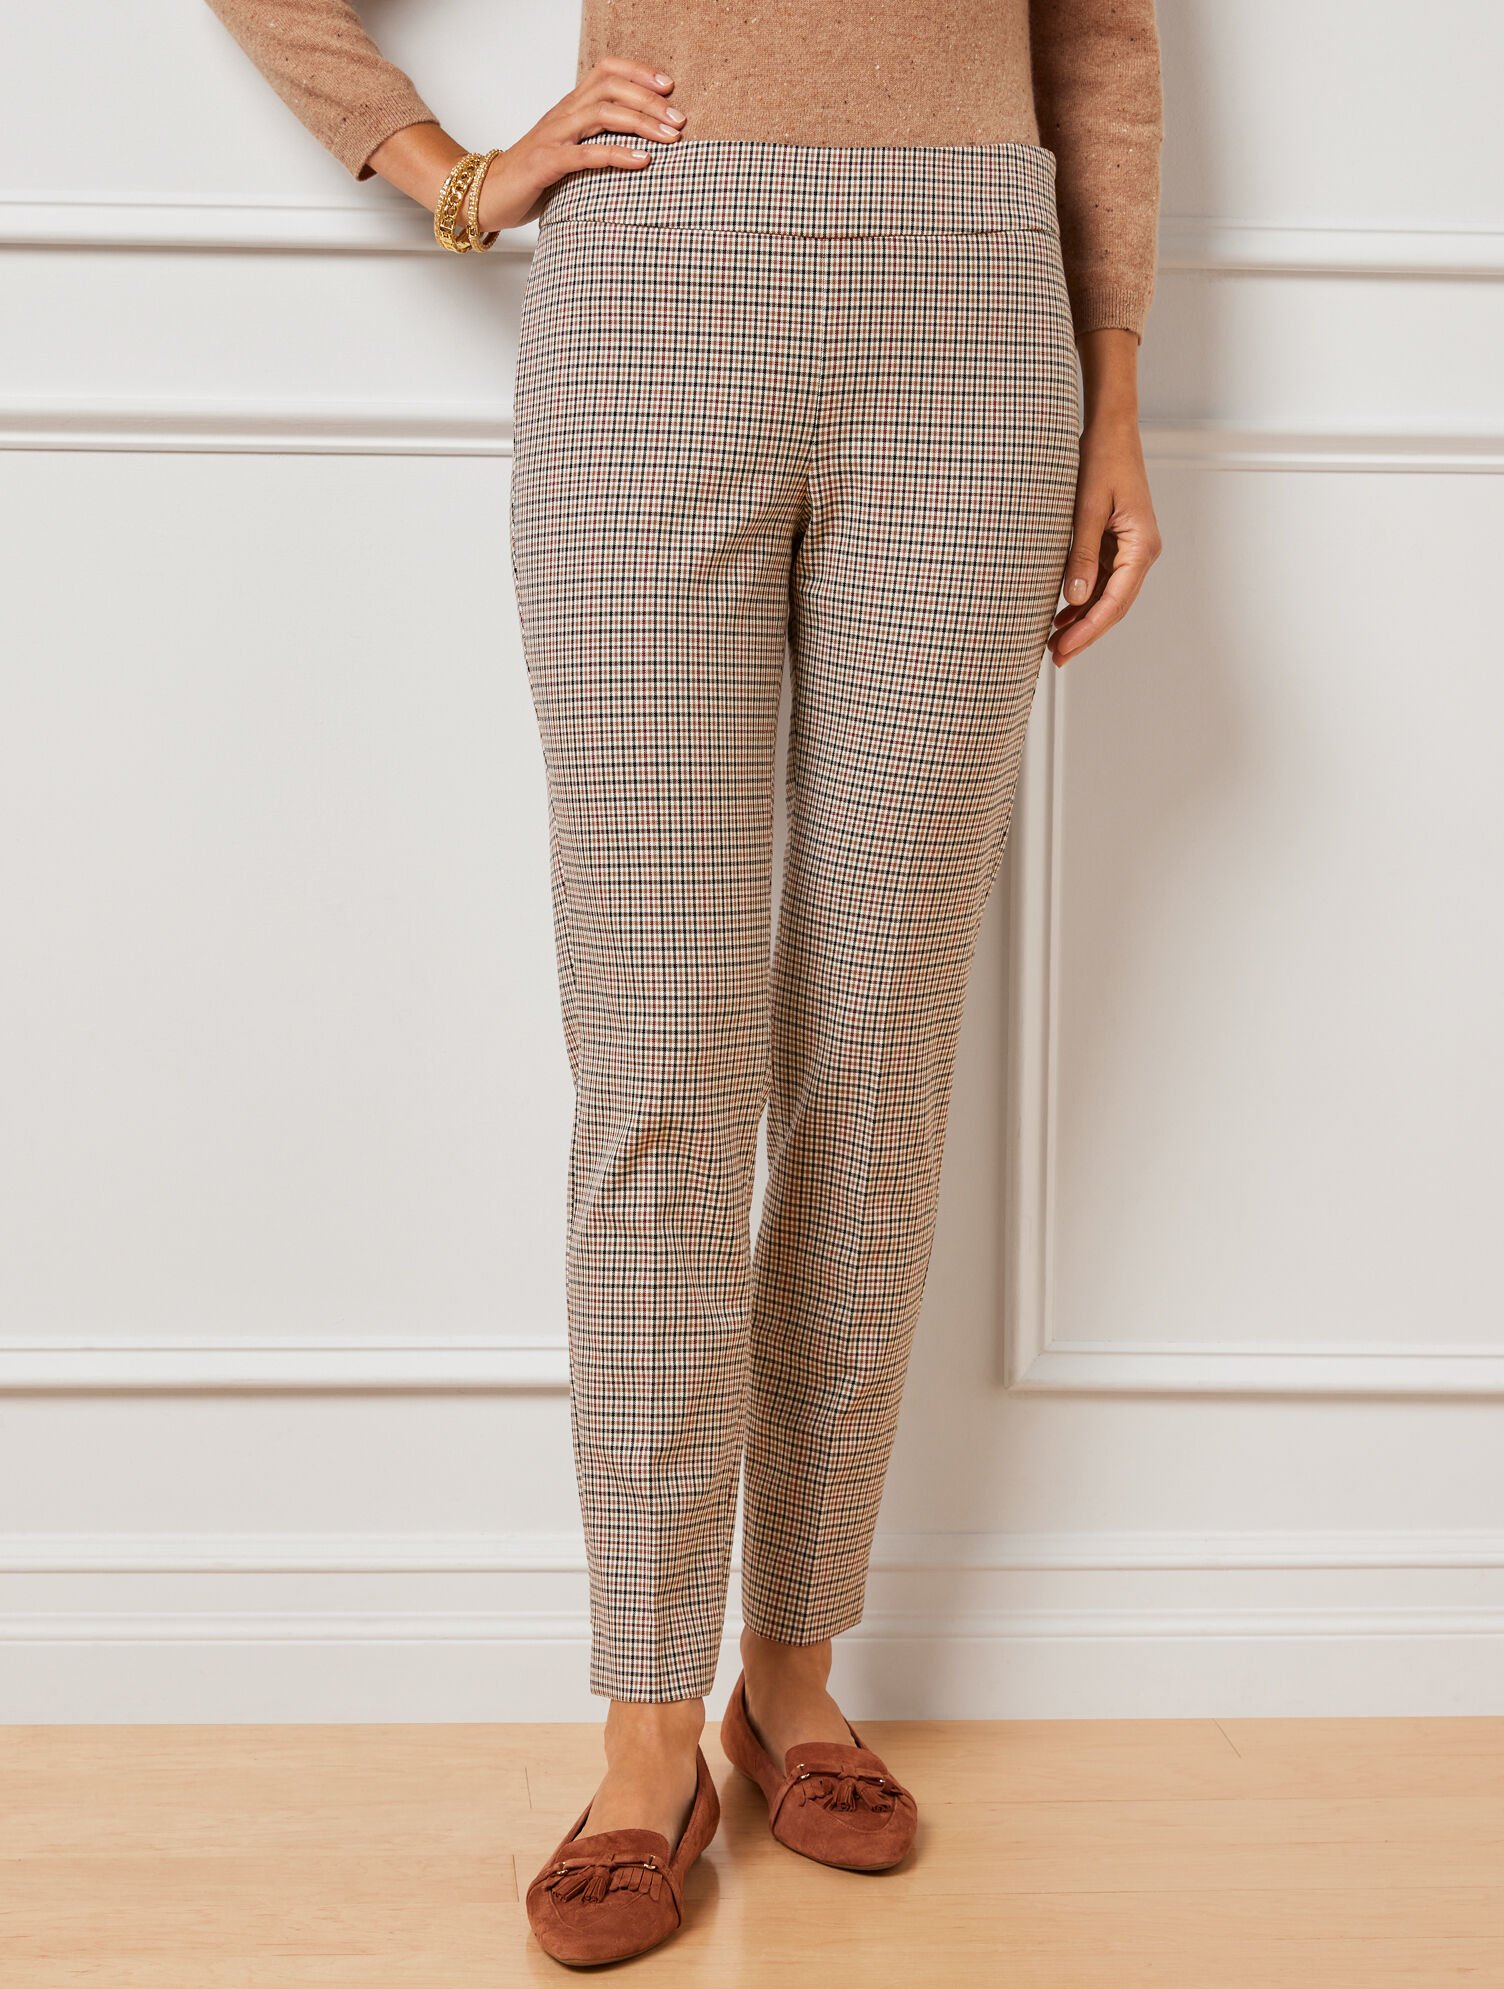 Talbots Chatham Ankle Pants - Toasty Check